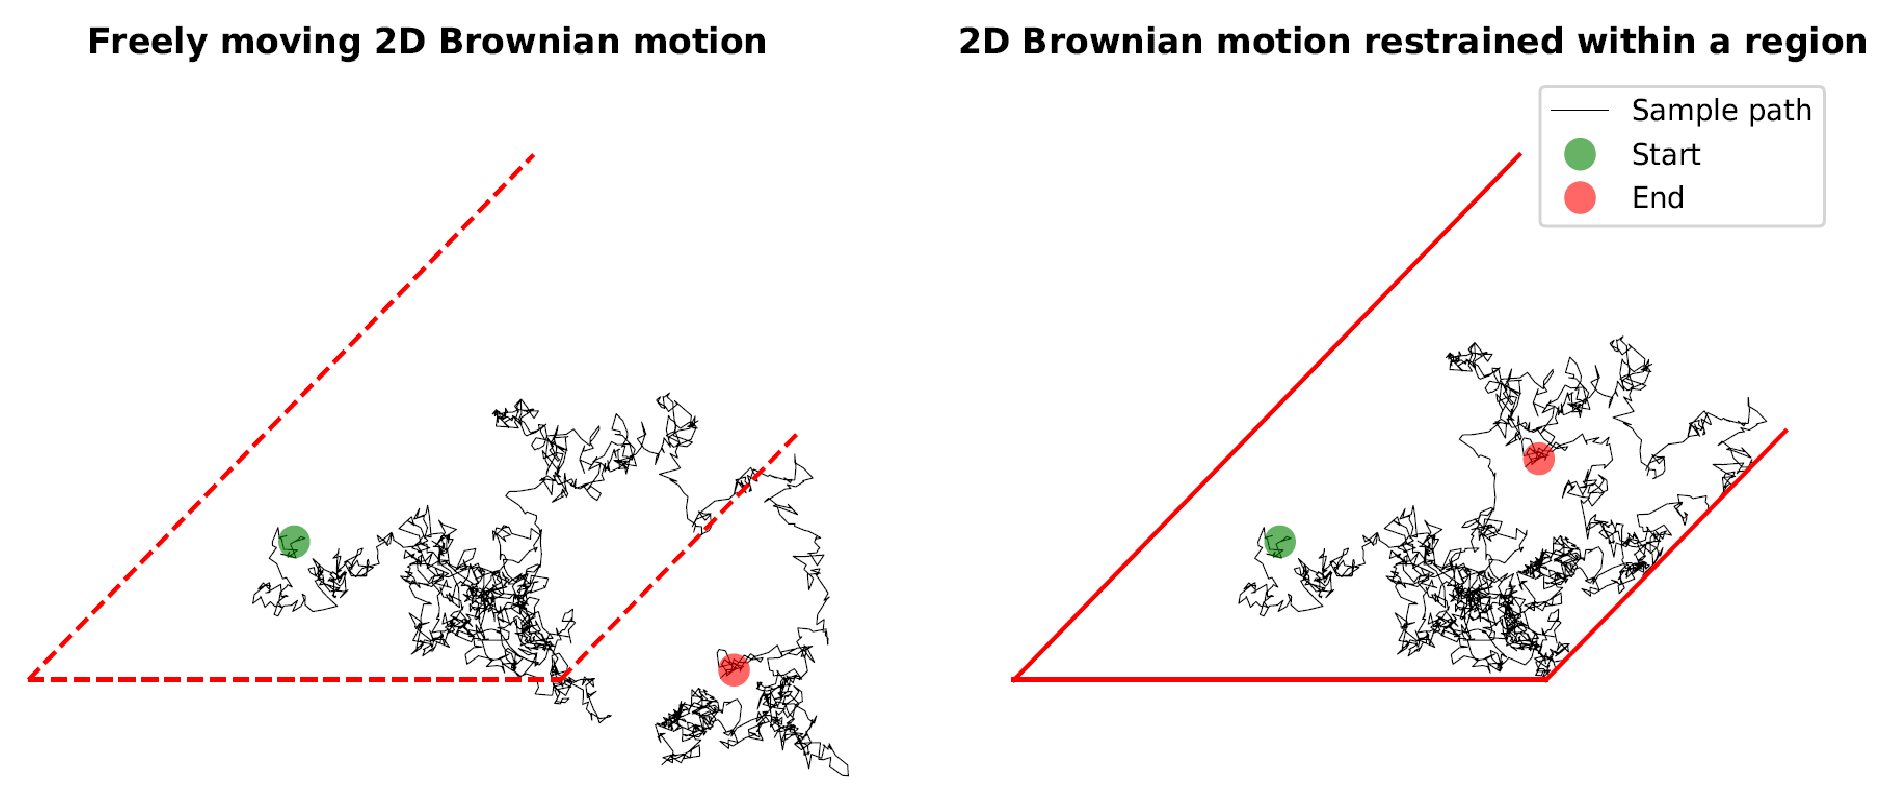 Figure 3. Sample paths for two 2-dimensional Brownian motions, one is allowed to move freely (left), and the other one is restrained within a no-arbitrage polytope (right). 